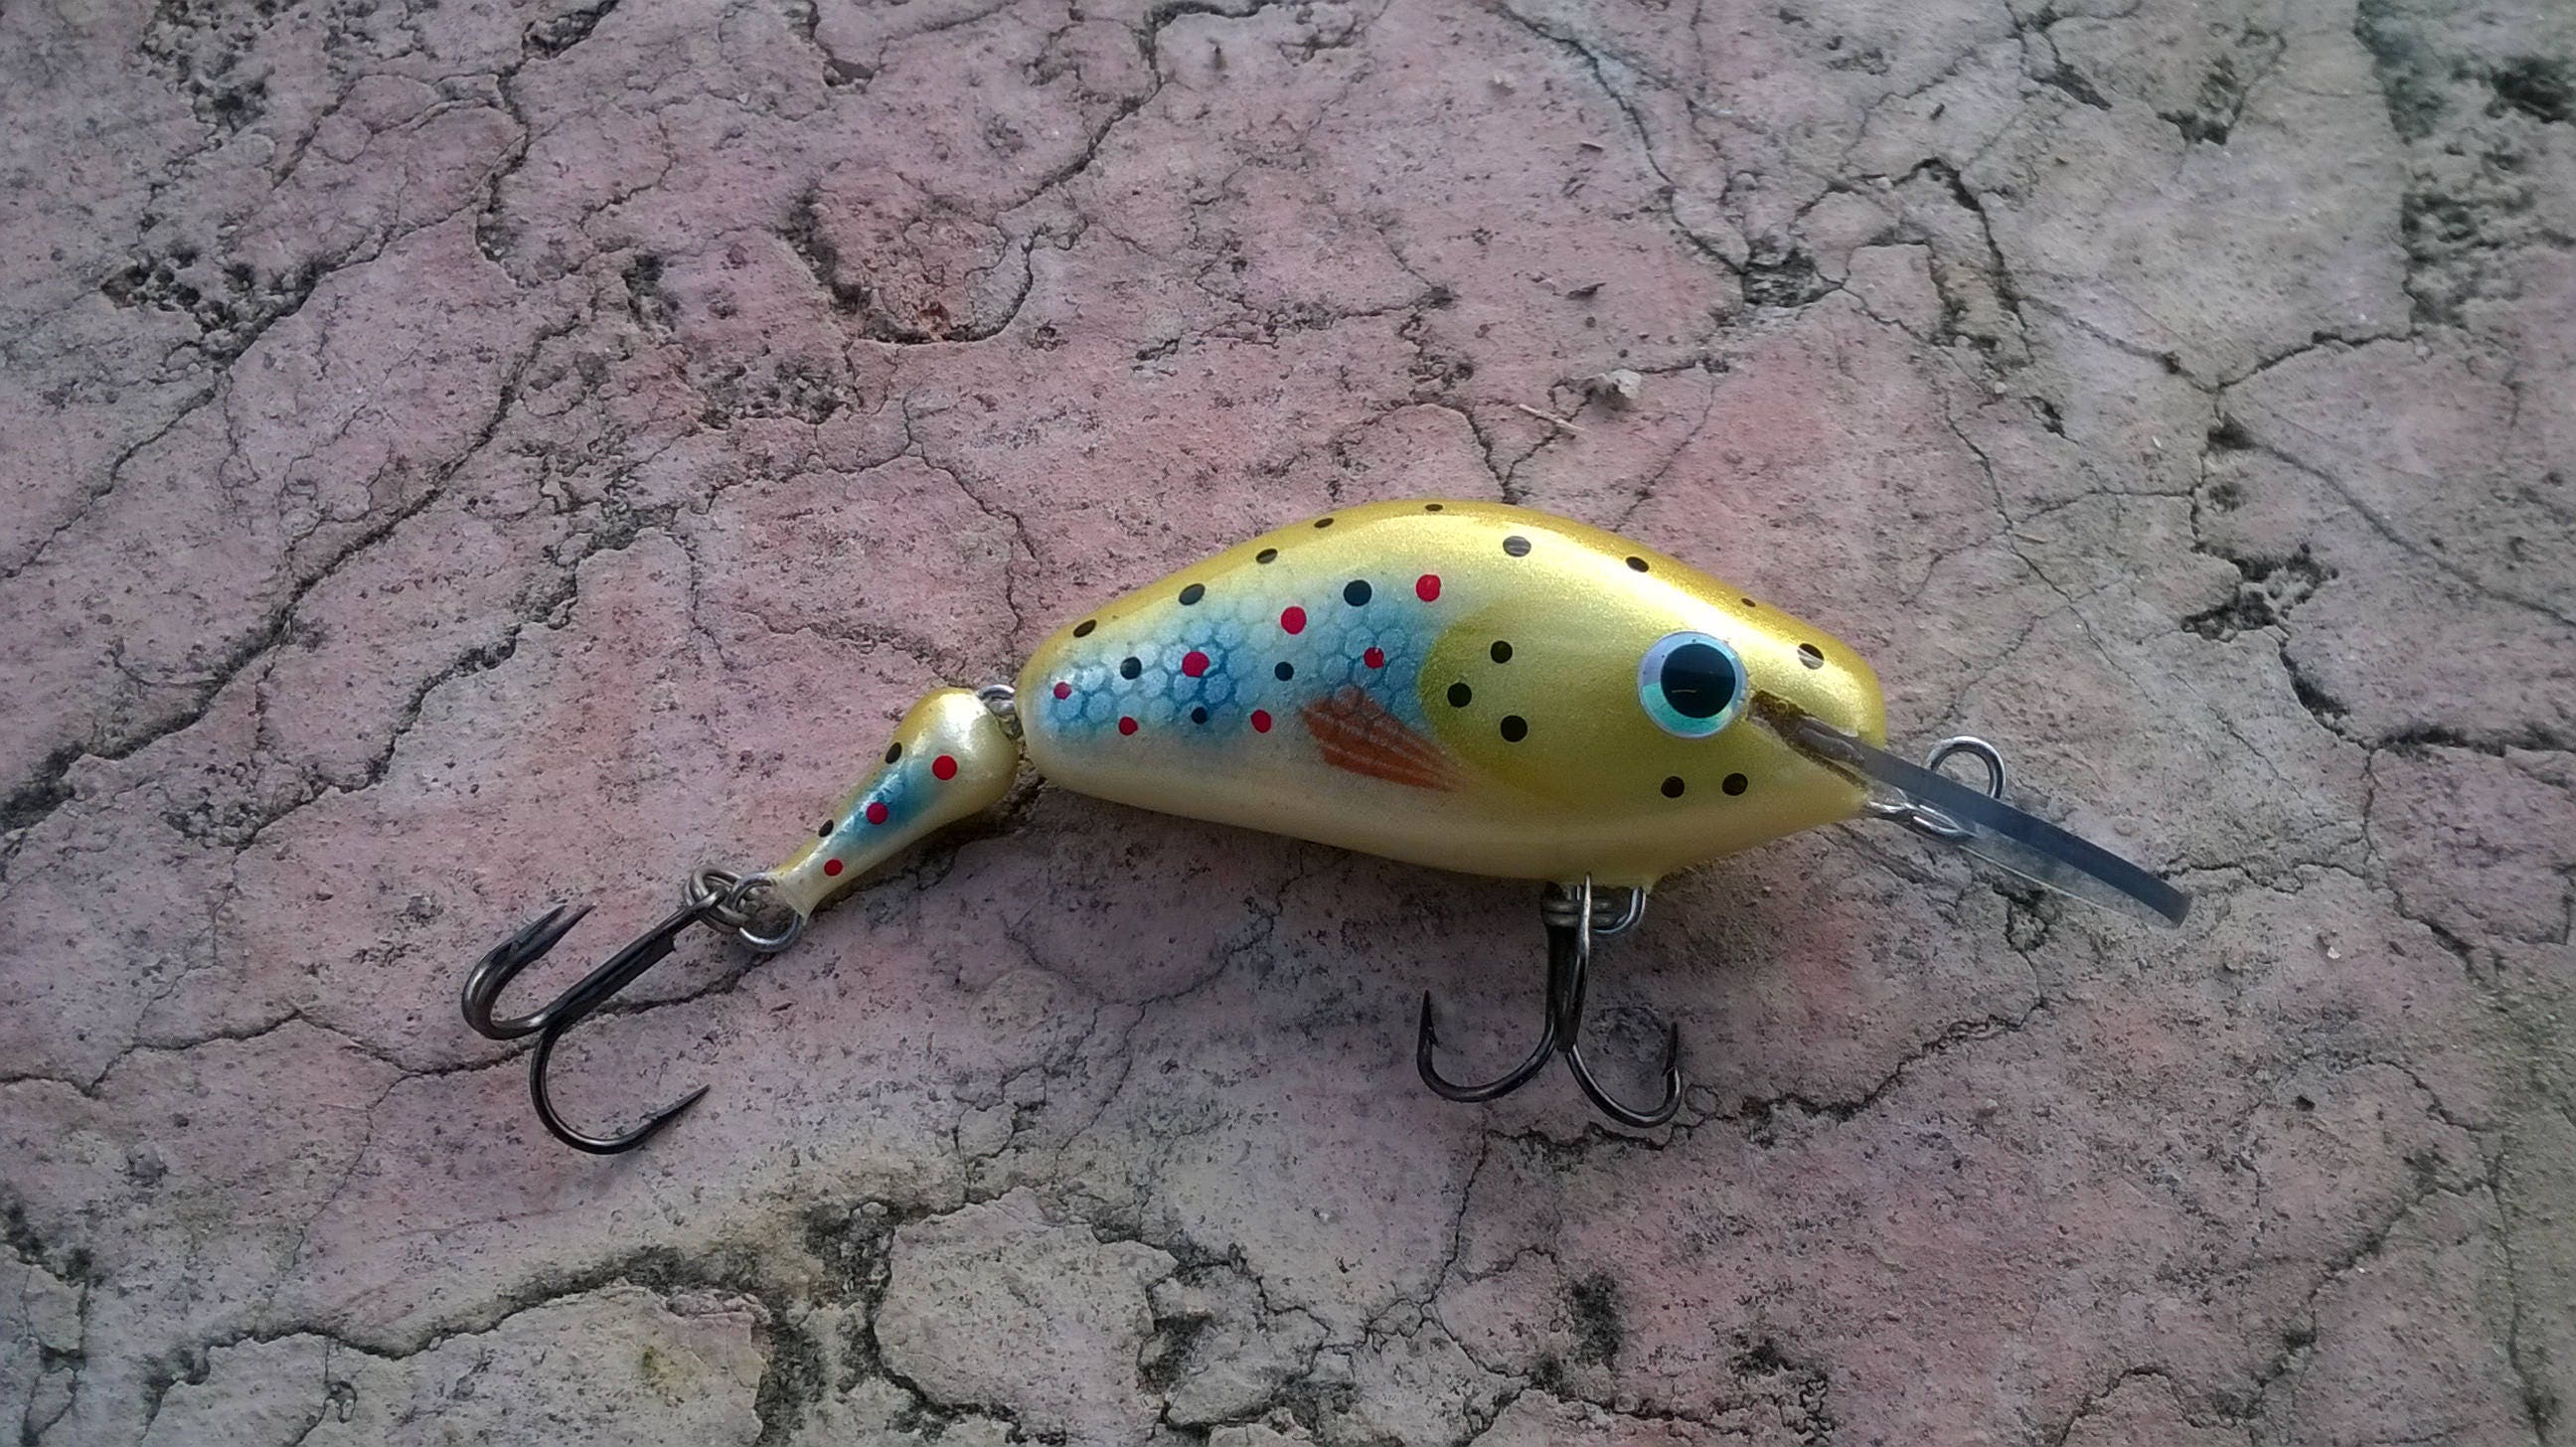 Handmade Fishing Lure, Crankbait Jointed Lure, Painted Wood Lure